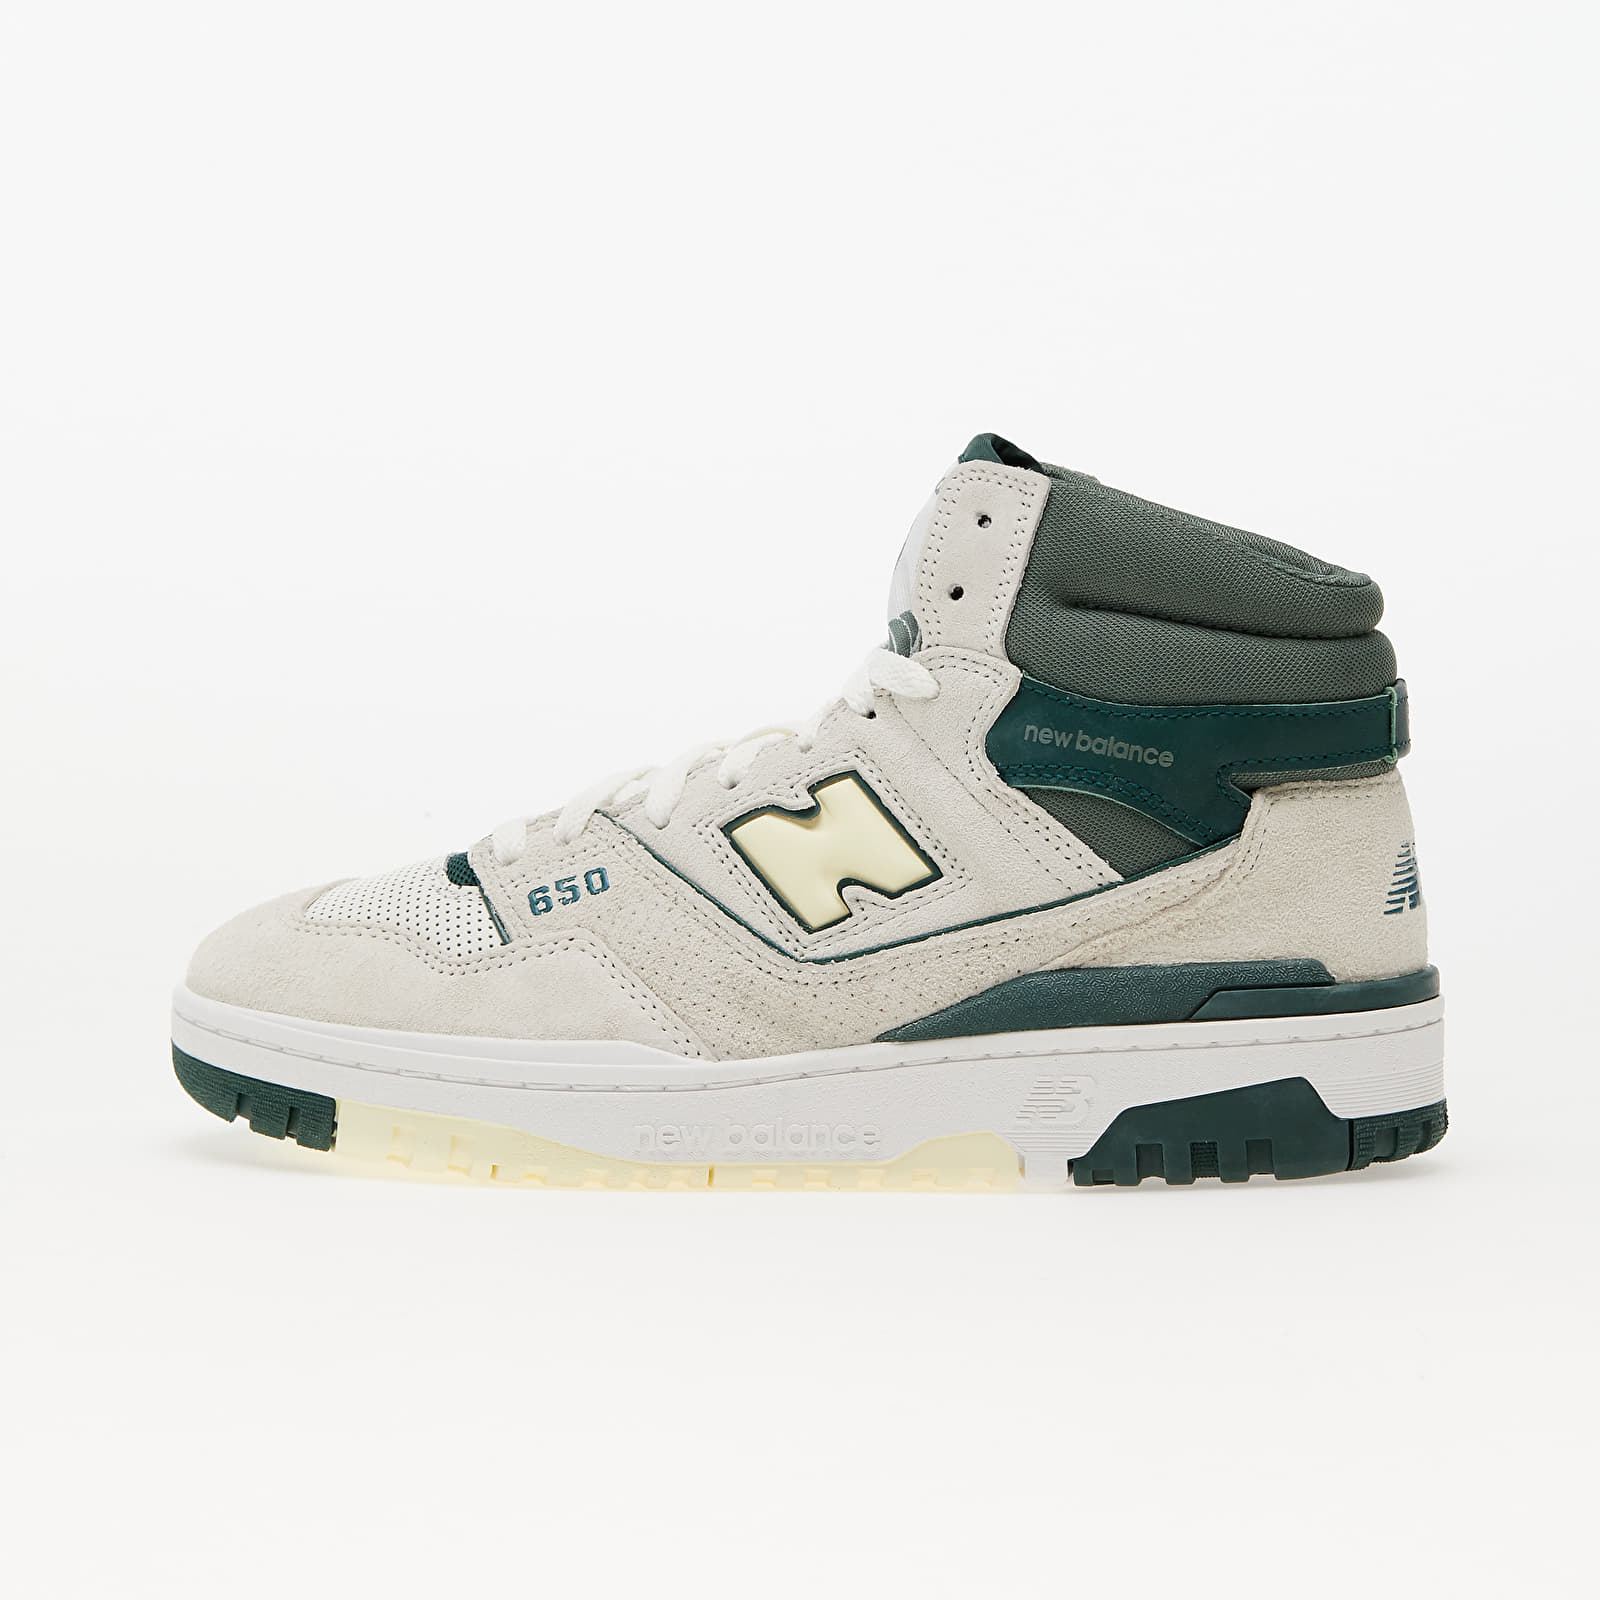 Men's sneakers and shoes New Balance 650 Sea Salt